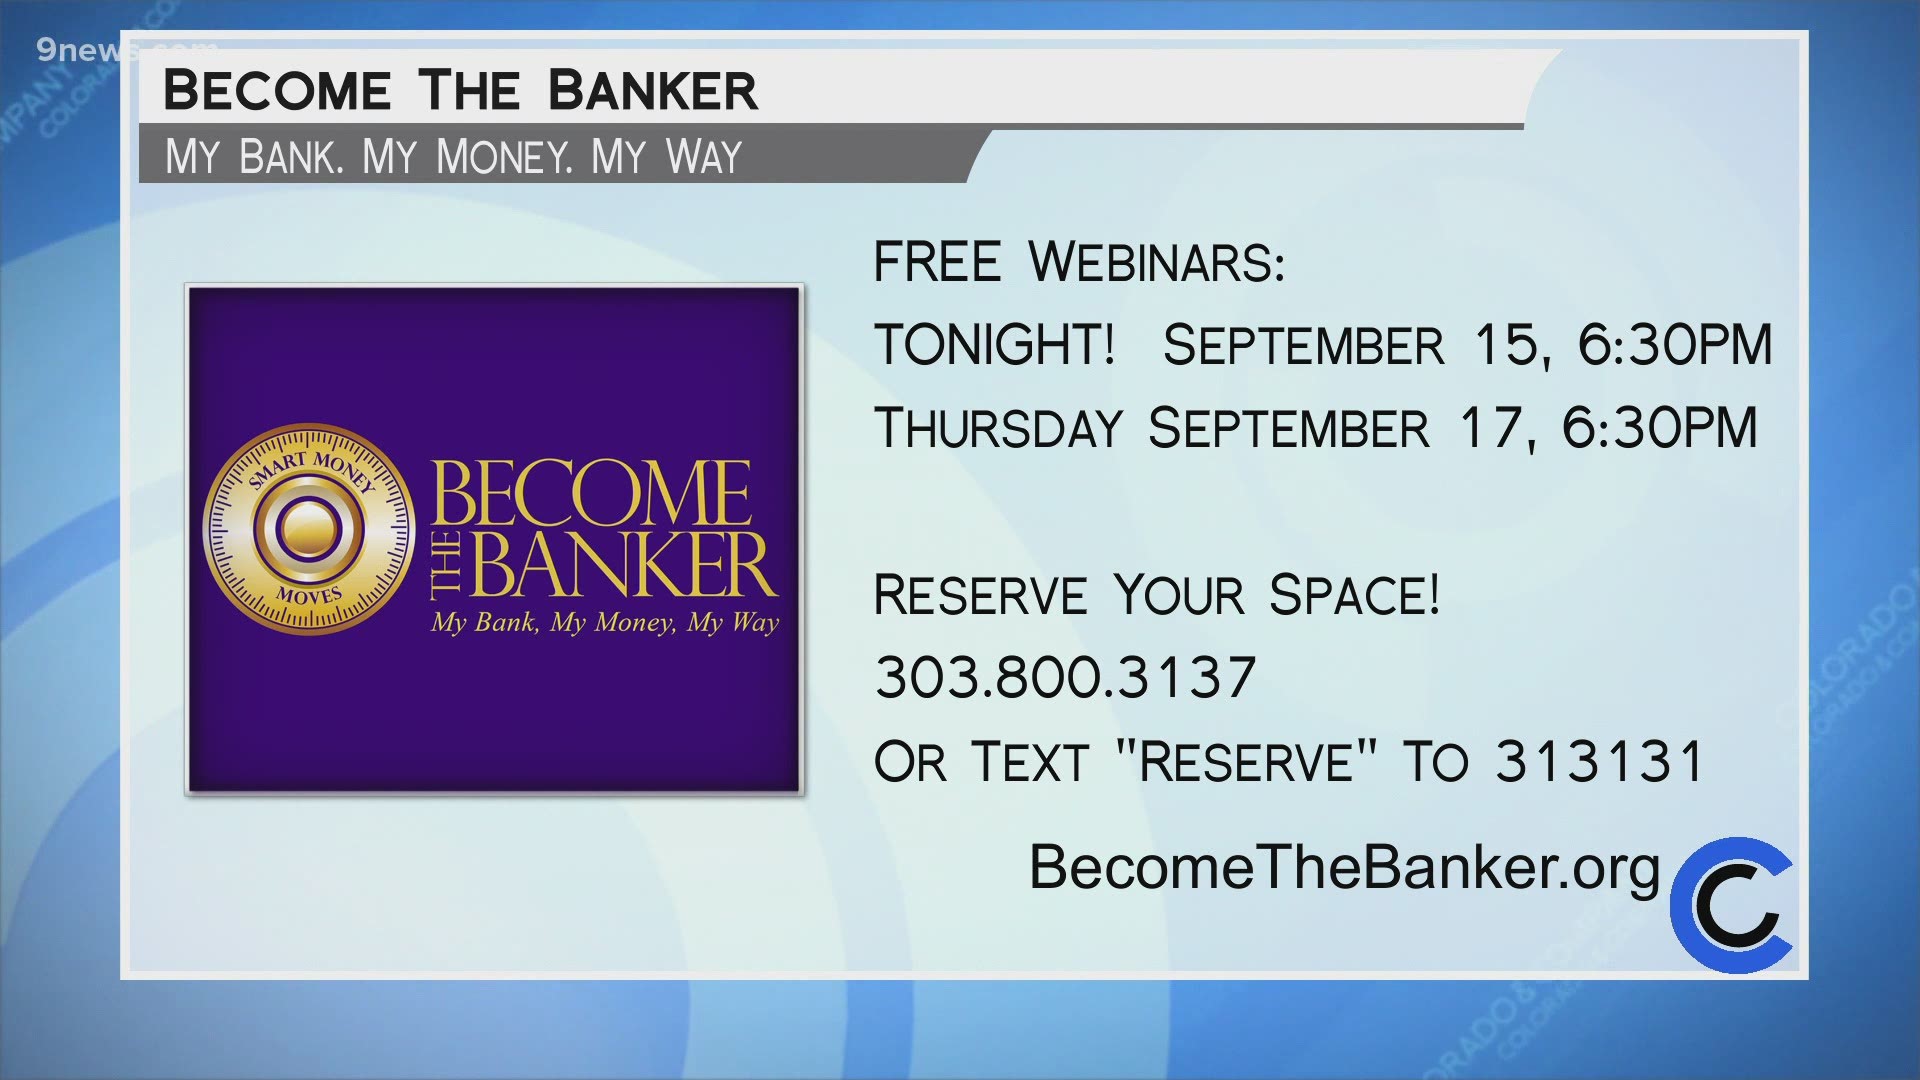 Attend a Become the Banker webinar on September 17th at 6:30PM. Register at BecomeTheBanker.org or call 303.800.3137. You can also text RESERVE to 313131.